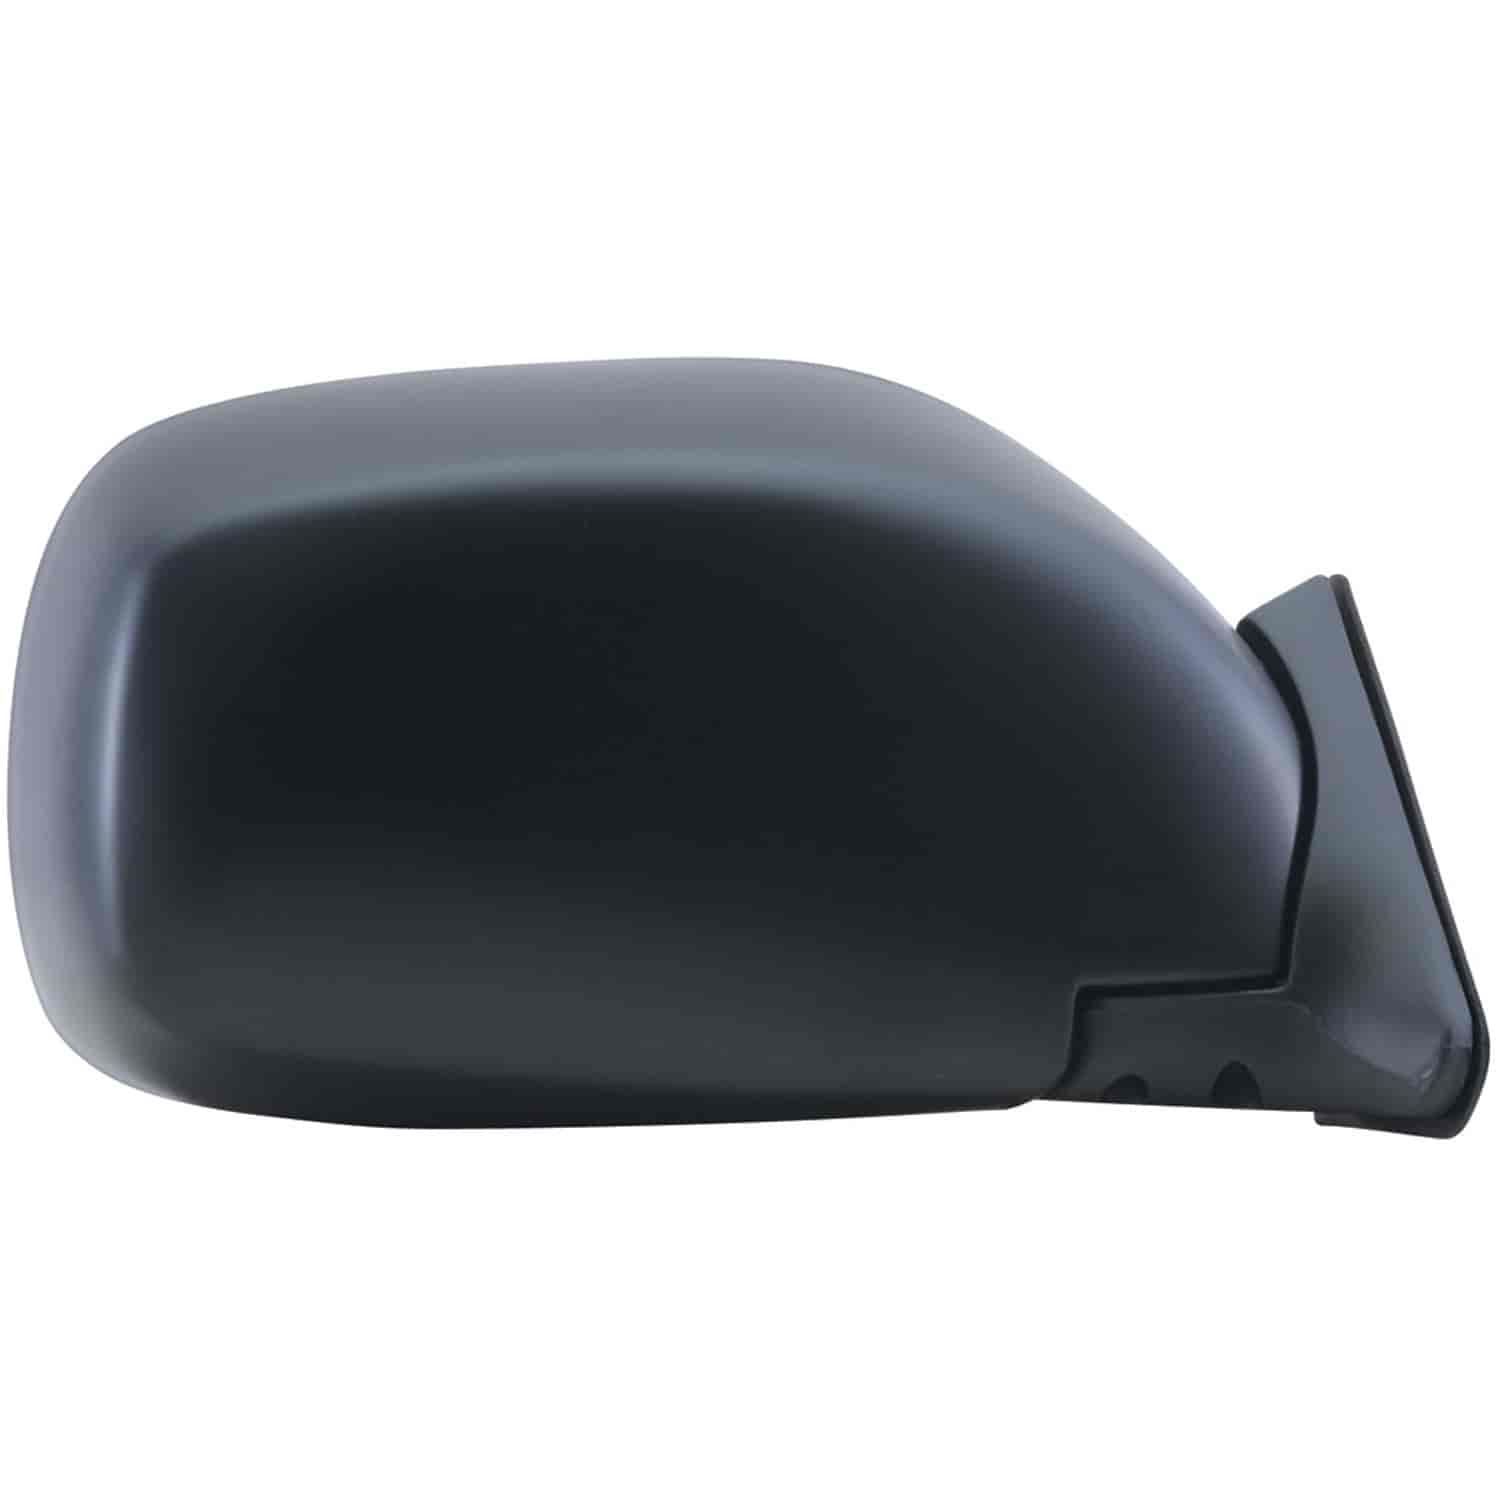 OEM Style Replacement mirror for 97-01 JEEP Cherokee passenger side mirror tested to fit and functio